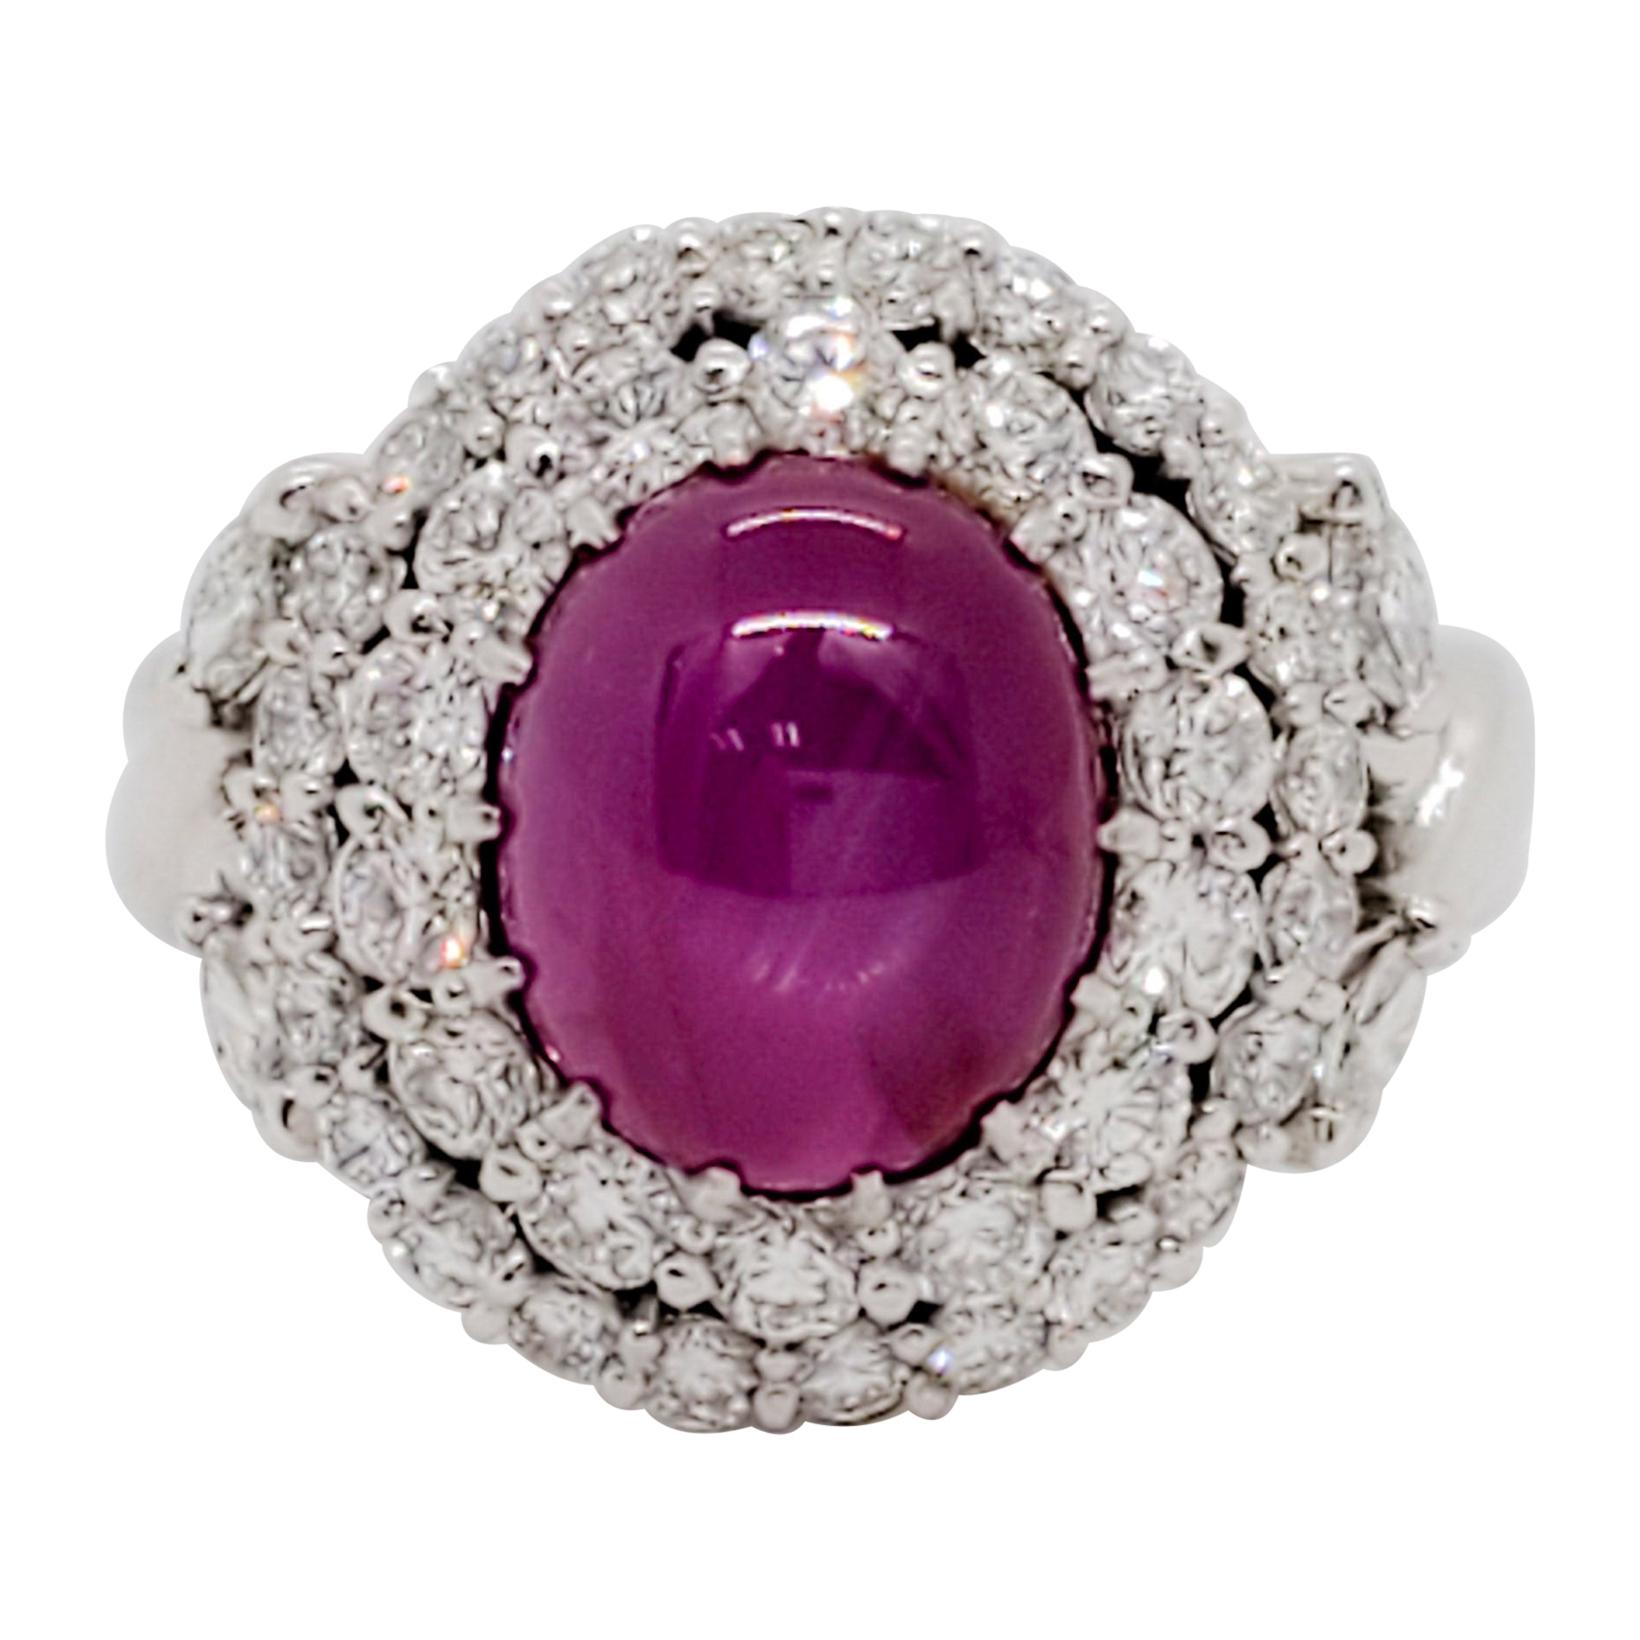 Star Ruby Cabochon Oval and White Diamond Cocktail Ring